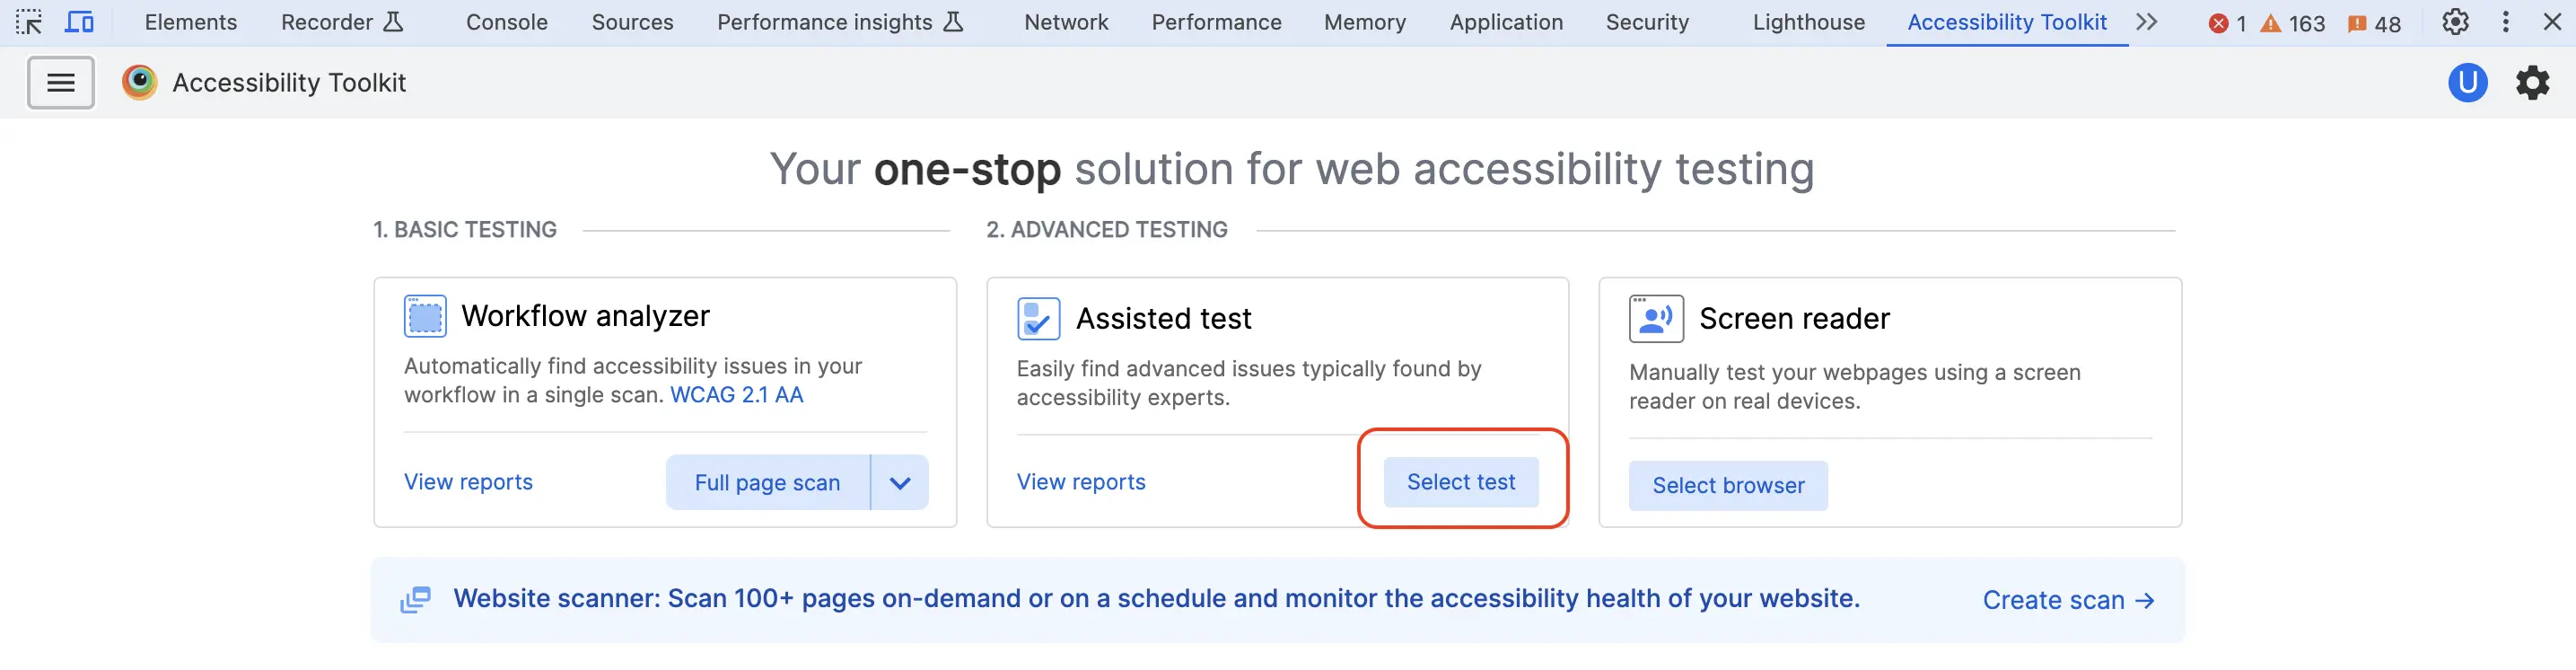 Click Select test to open an assisted test